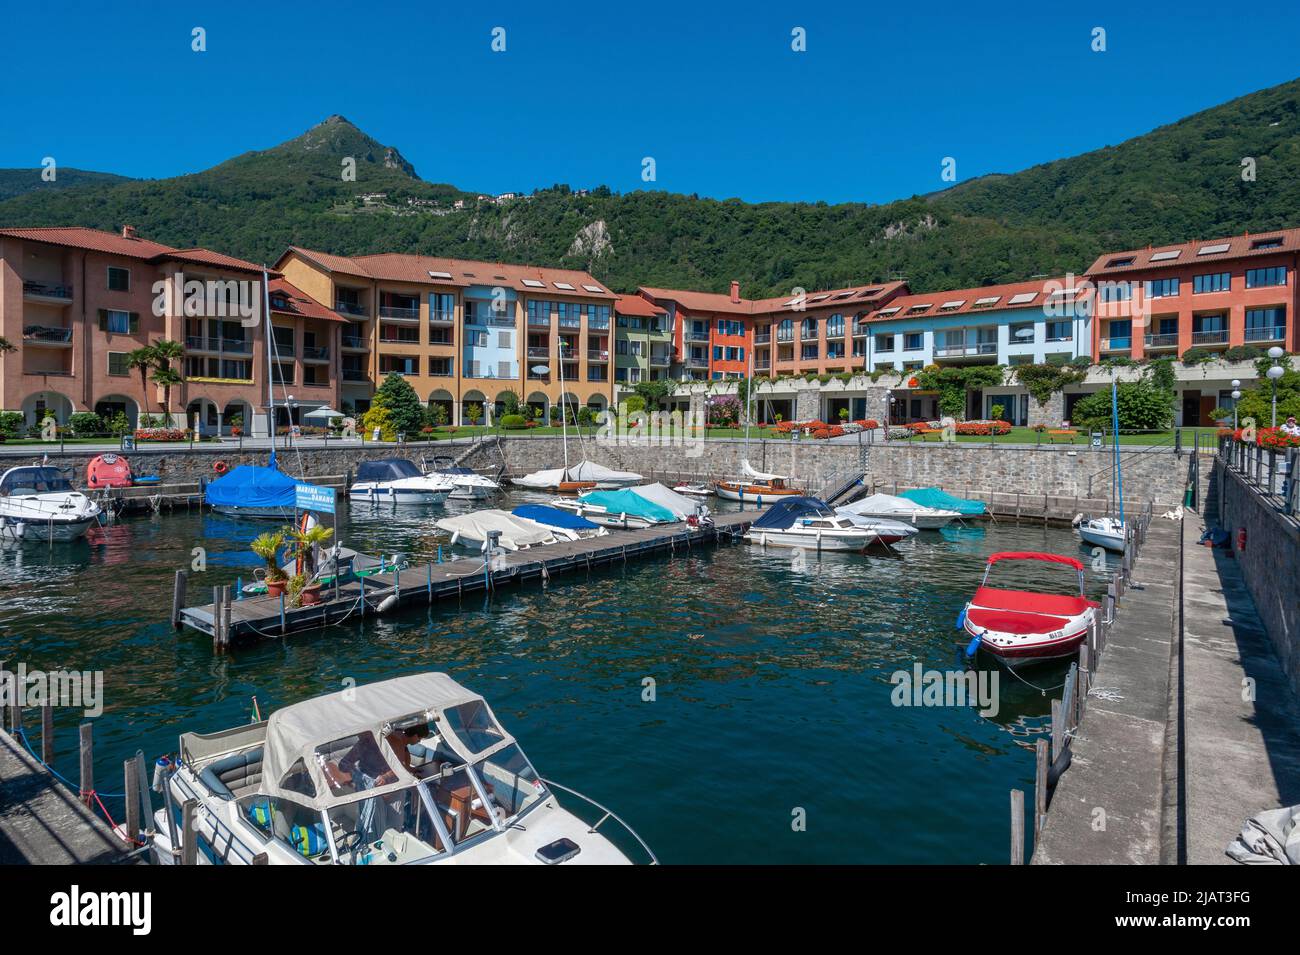 Boat harbor and holiday resort on the shore of Lake Maggiore, Cannero Riviera, Piedmont, Italy, Europe Stock Photo